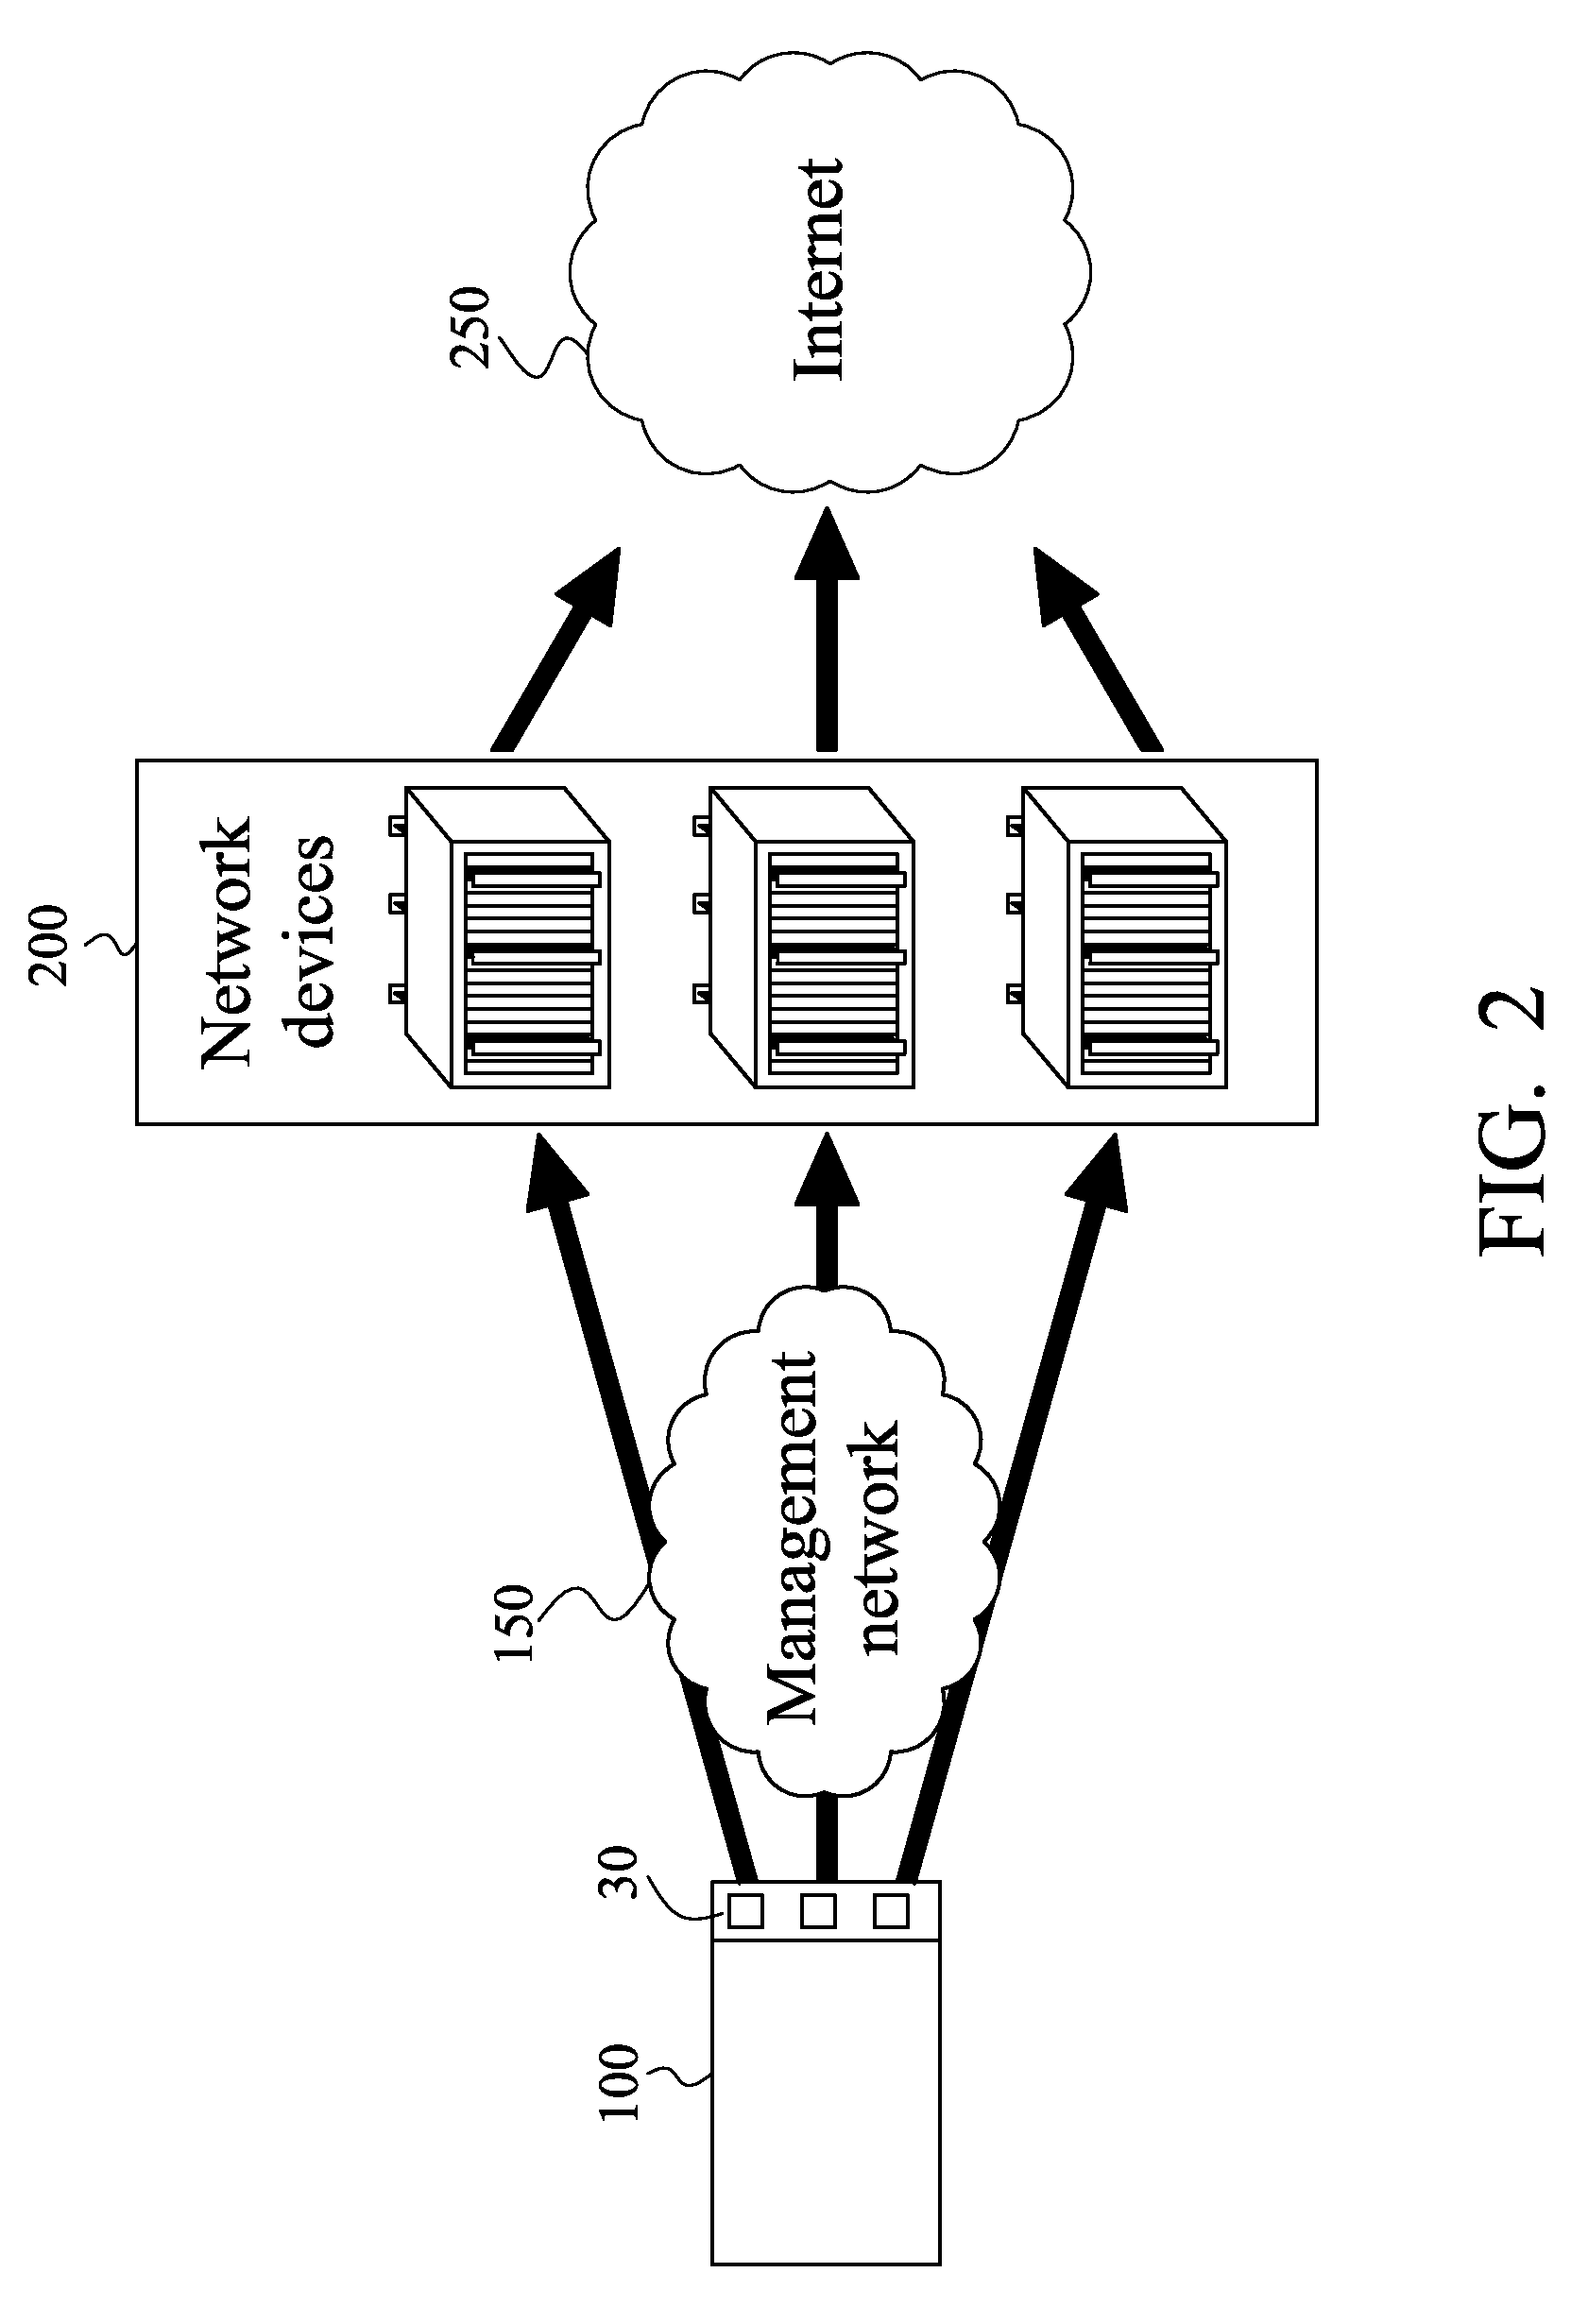 Network management systems and method for testing network devices using the same